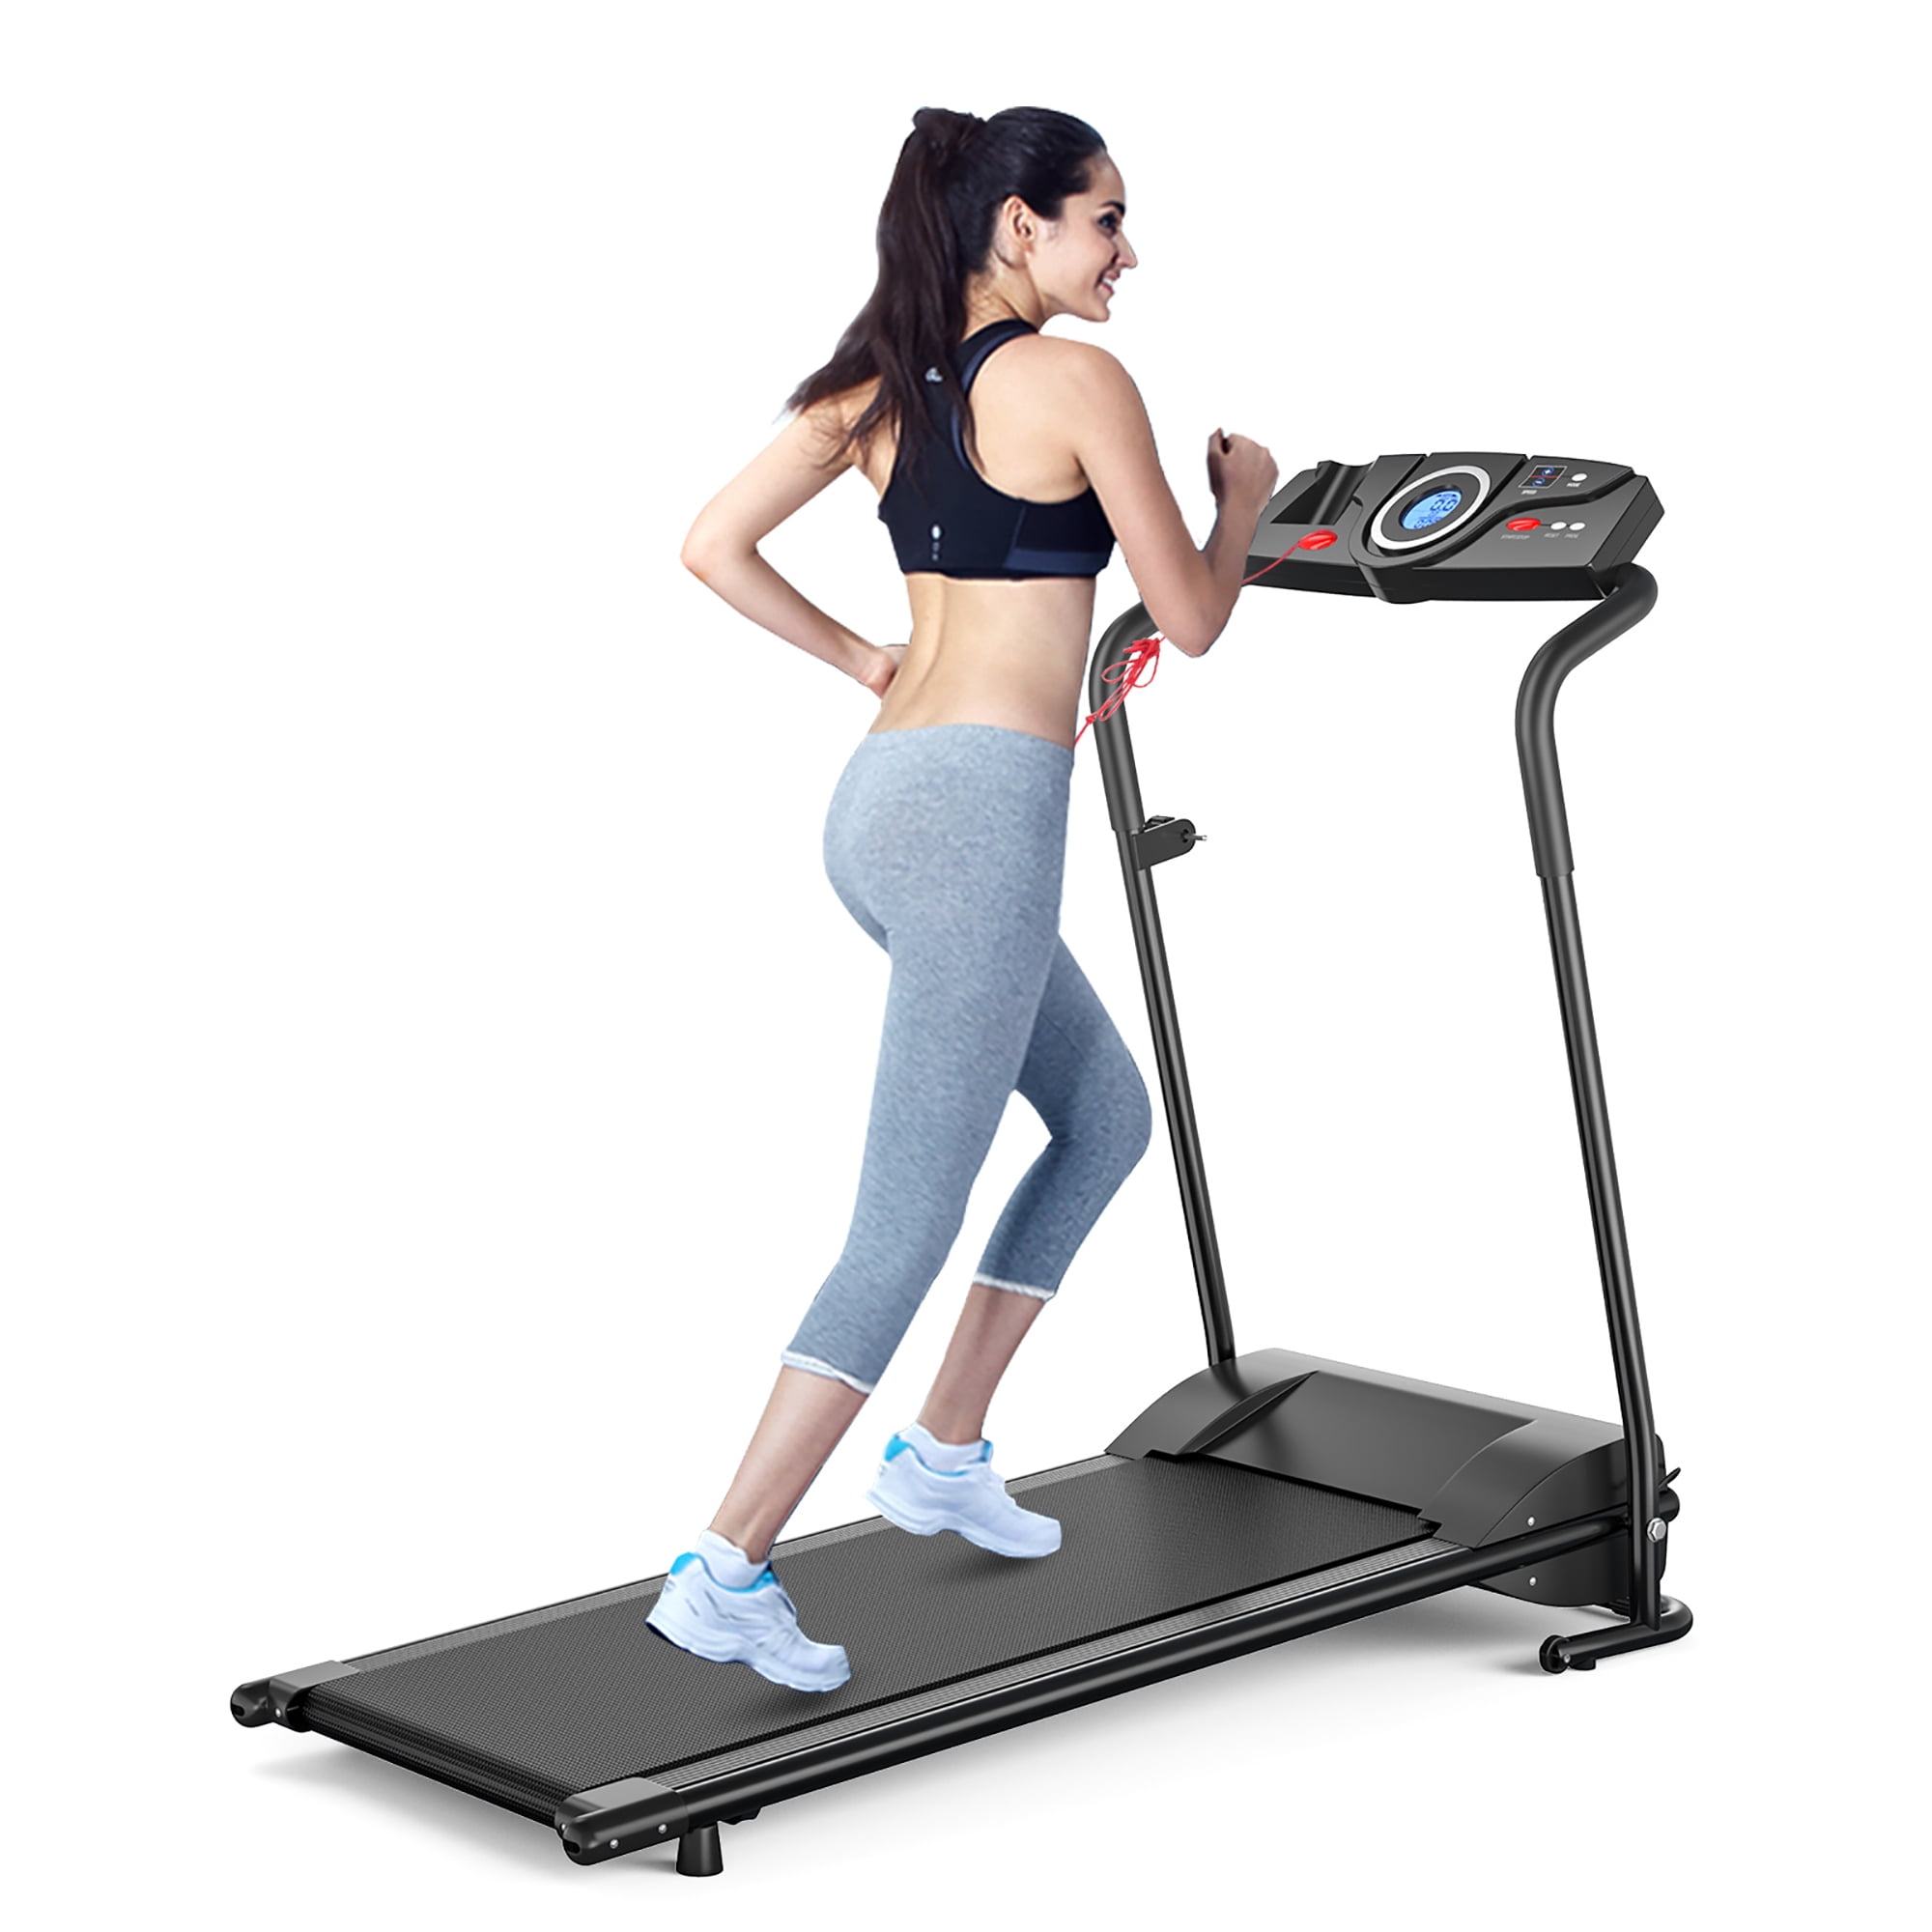 Details about   1100W Folding Electric Treadmill Running Motorized Exercise Fitness Machine US 